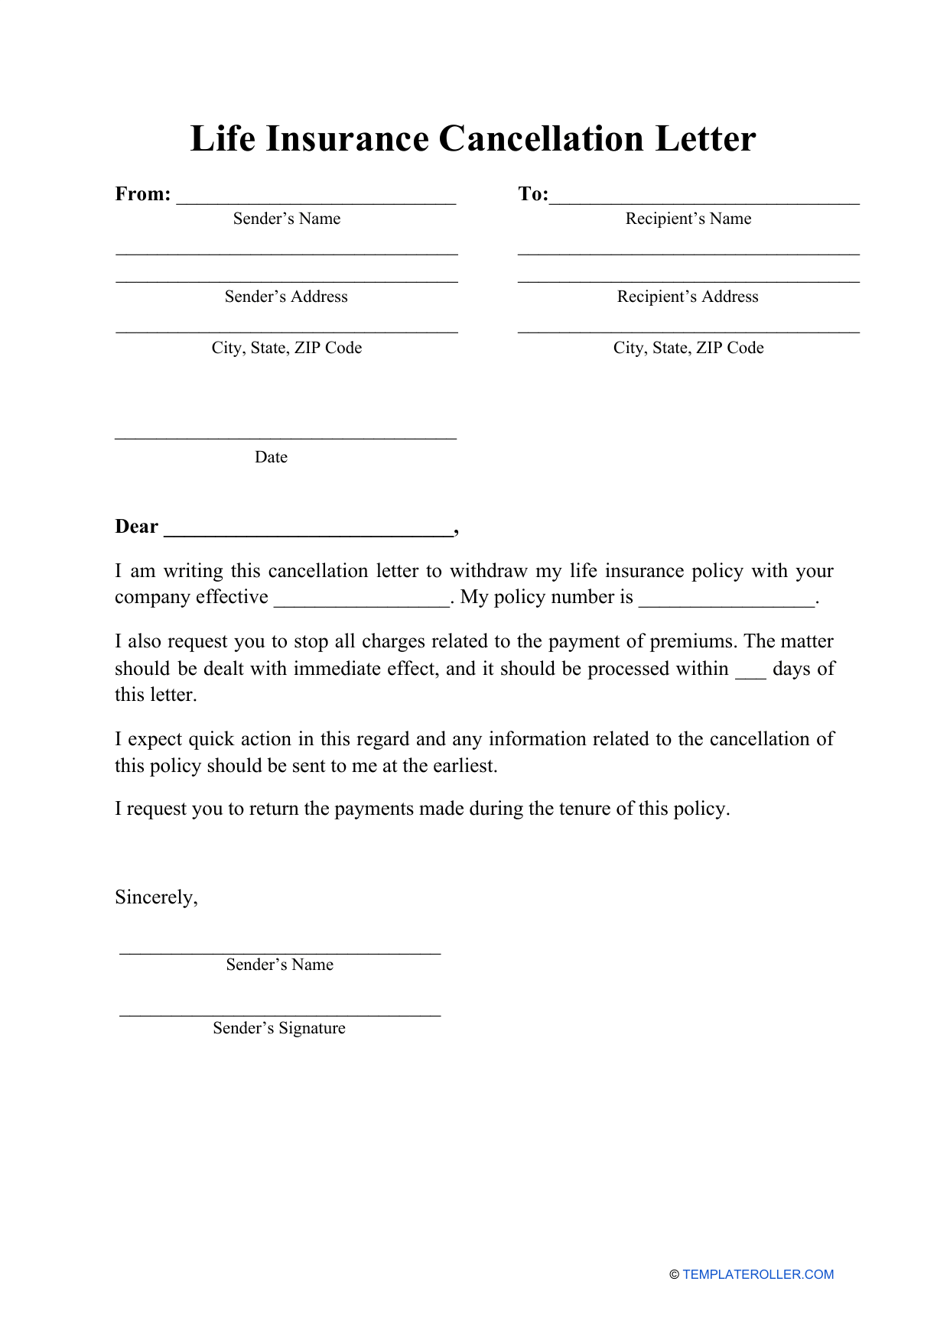 Life Insurance Cancellation Letter Template Download Printable PDF